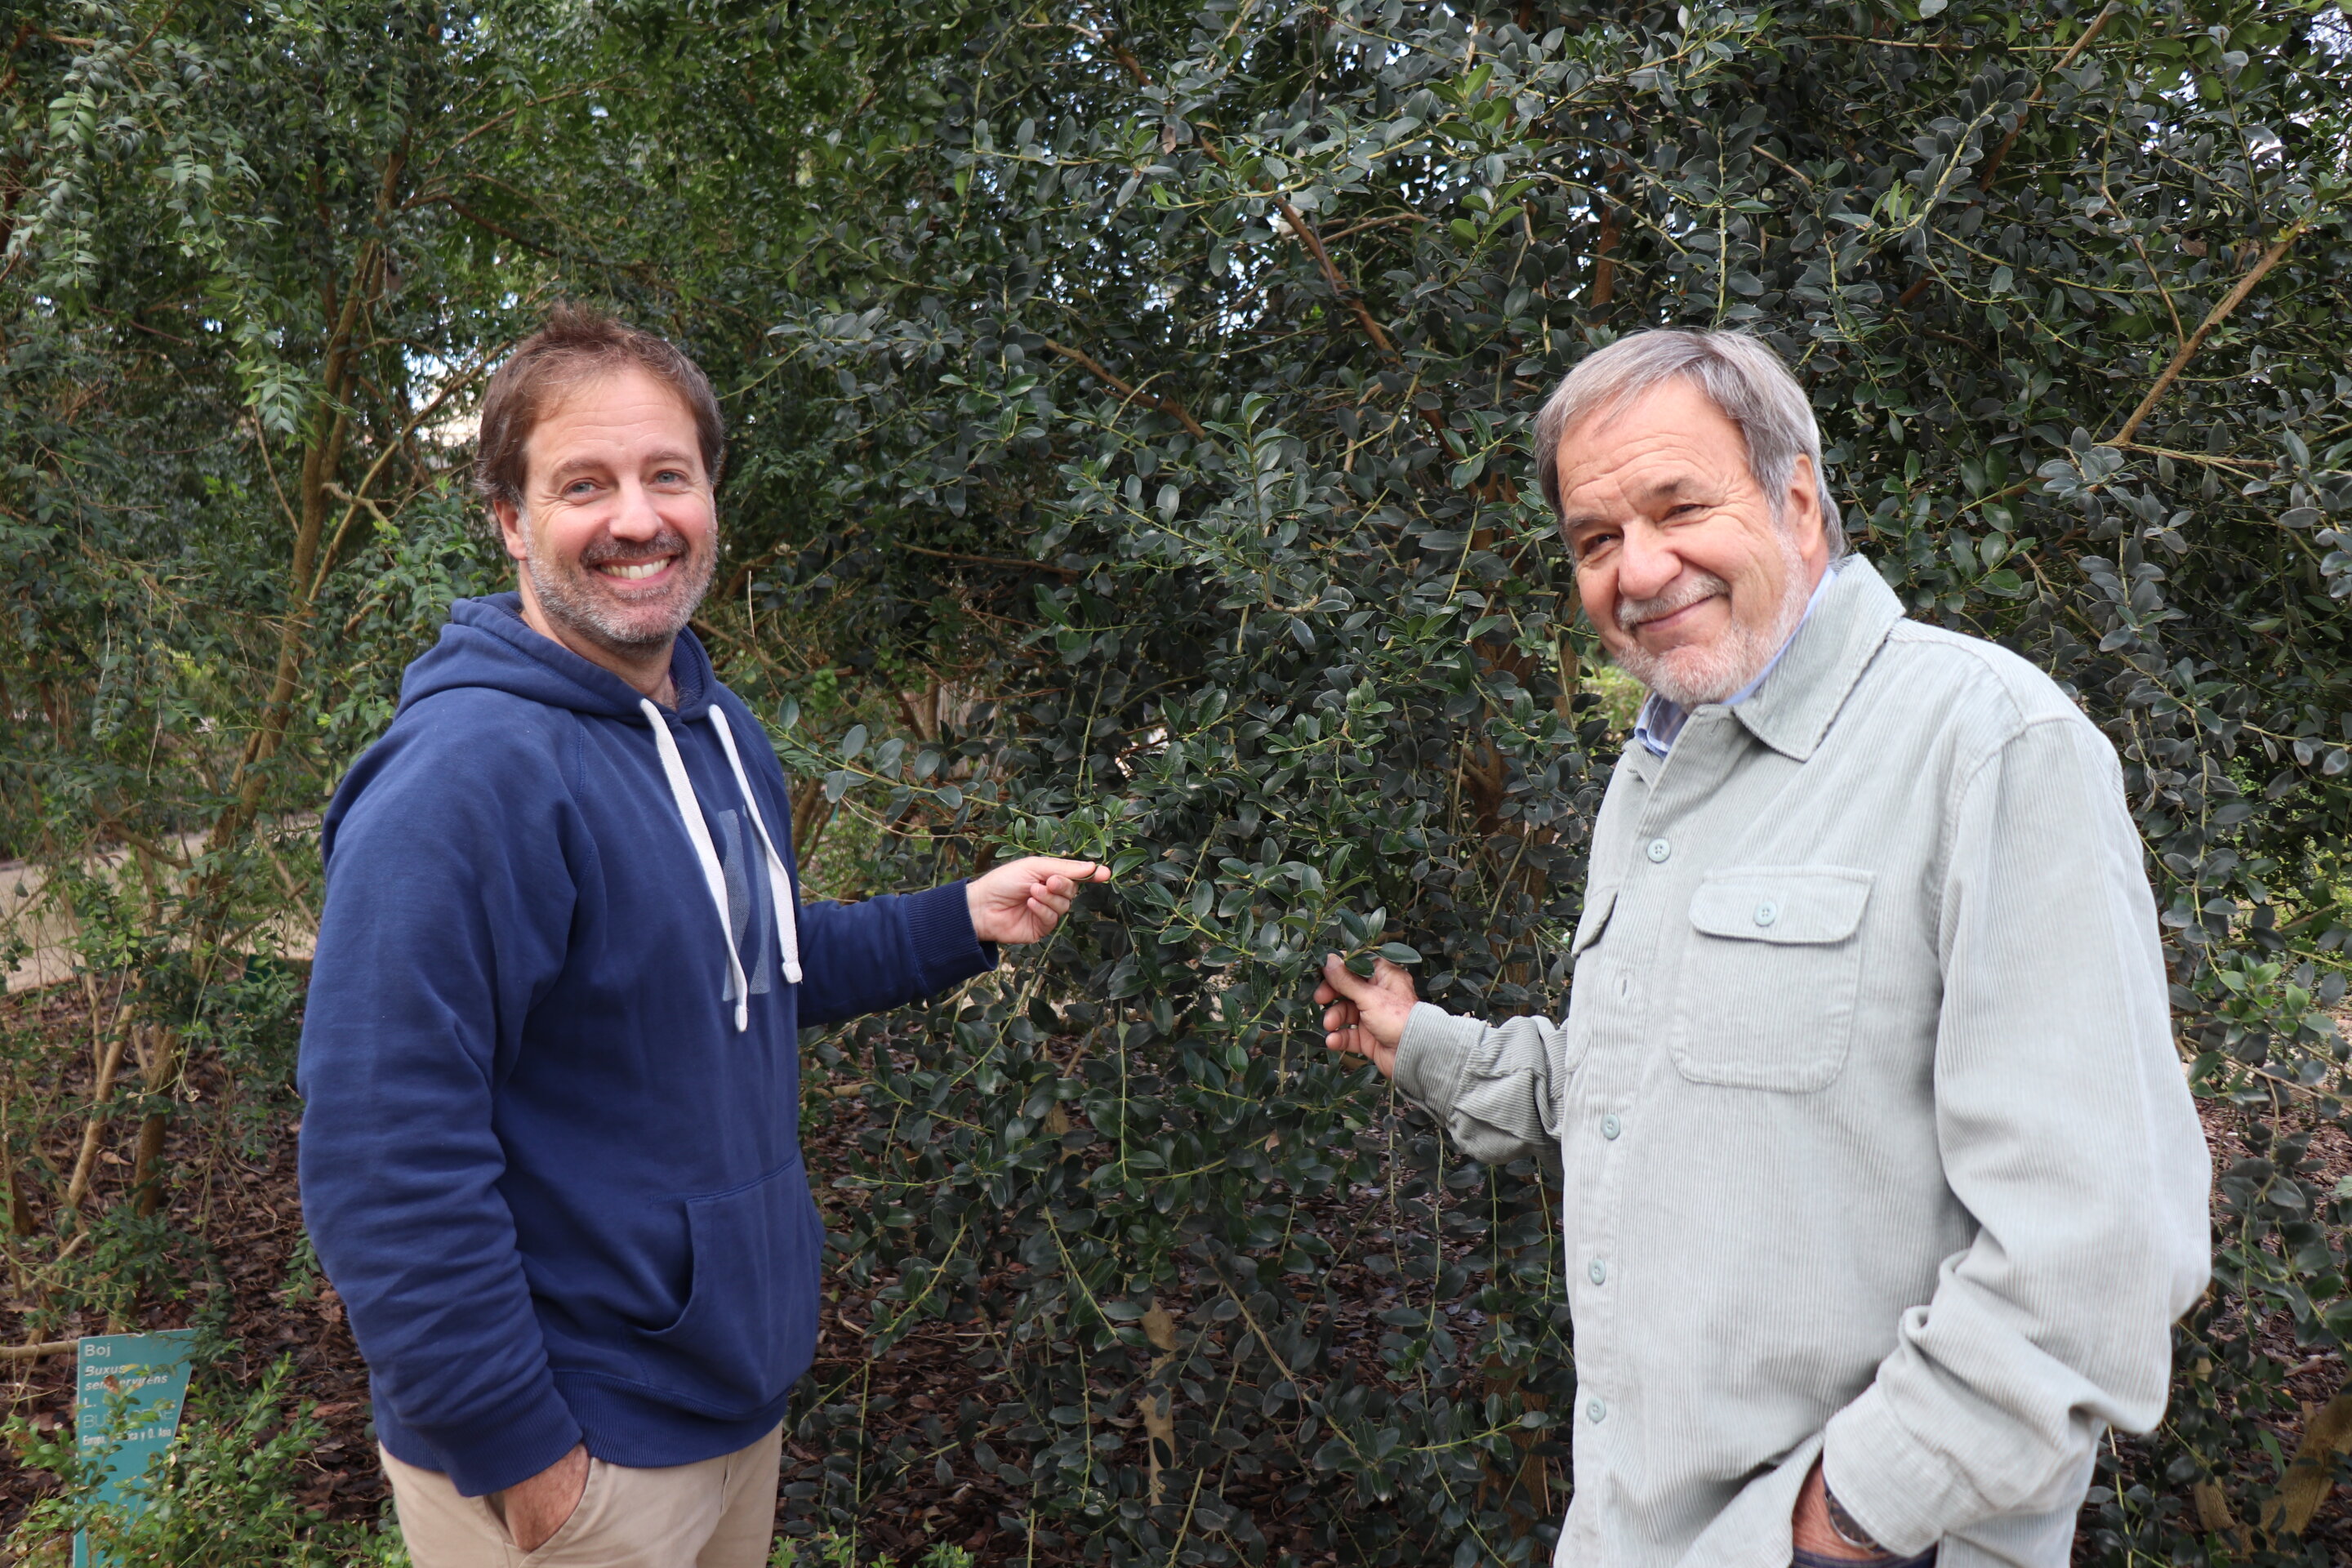 Projected climate change scenarios portend the disappearance of the Balearic boxwood